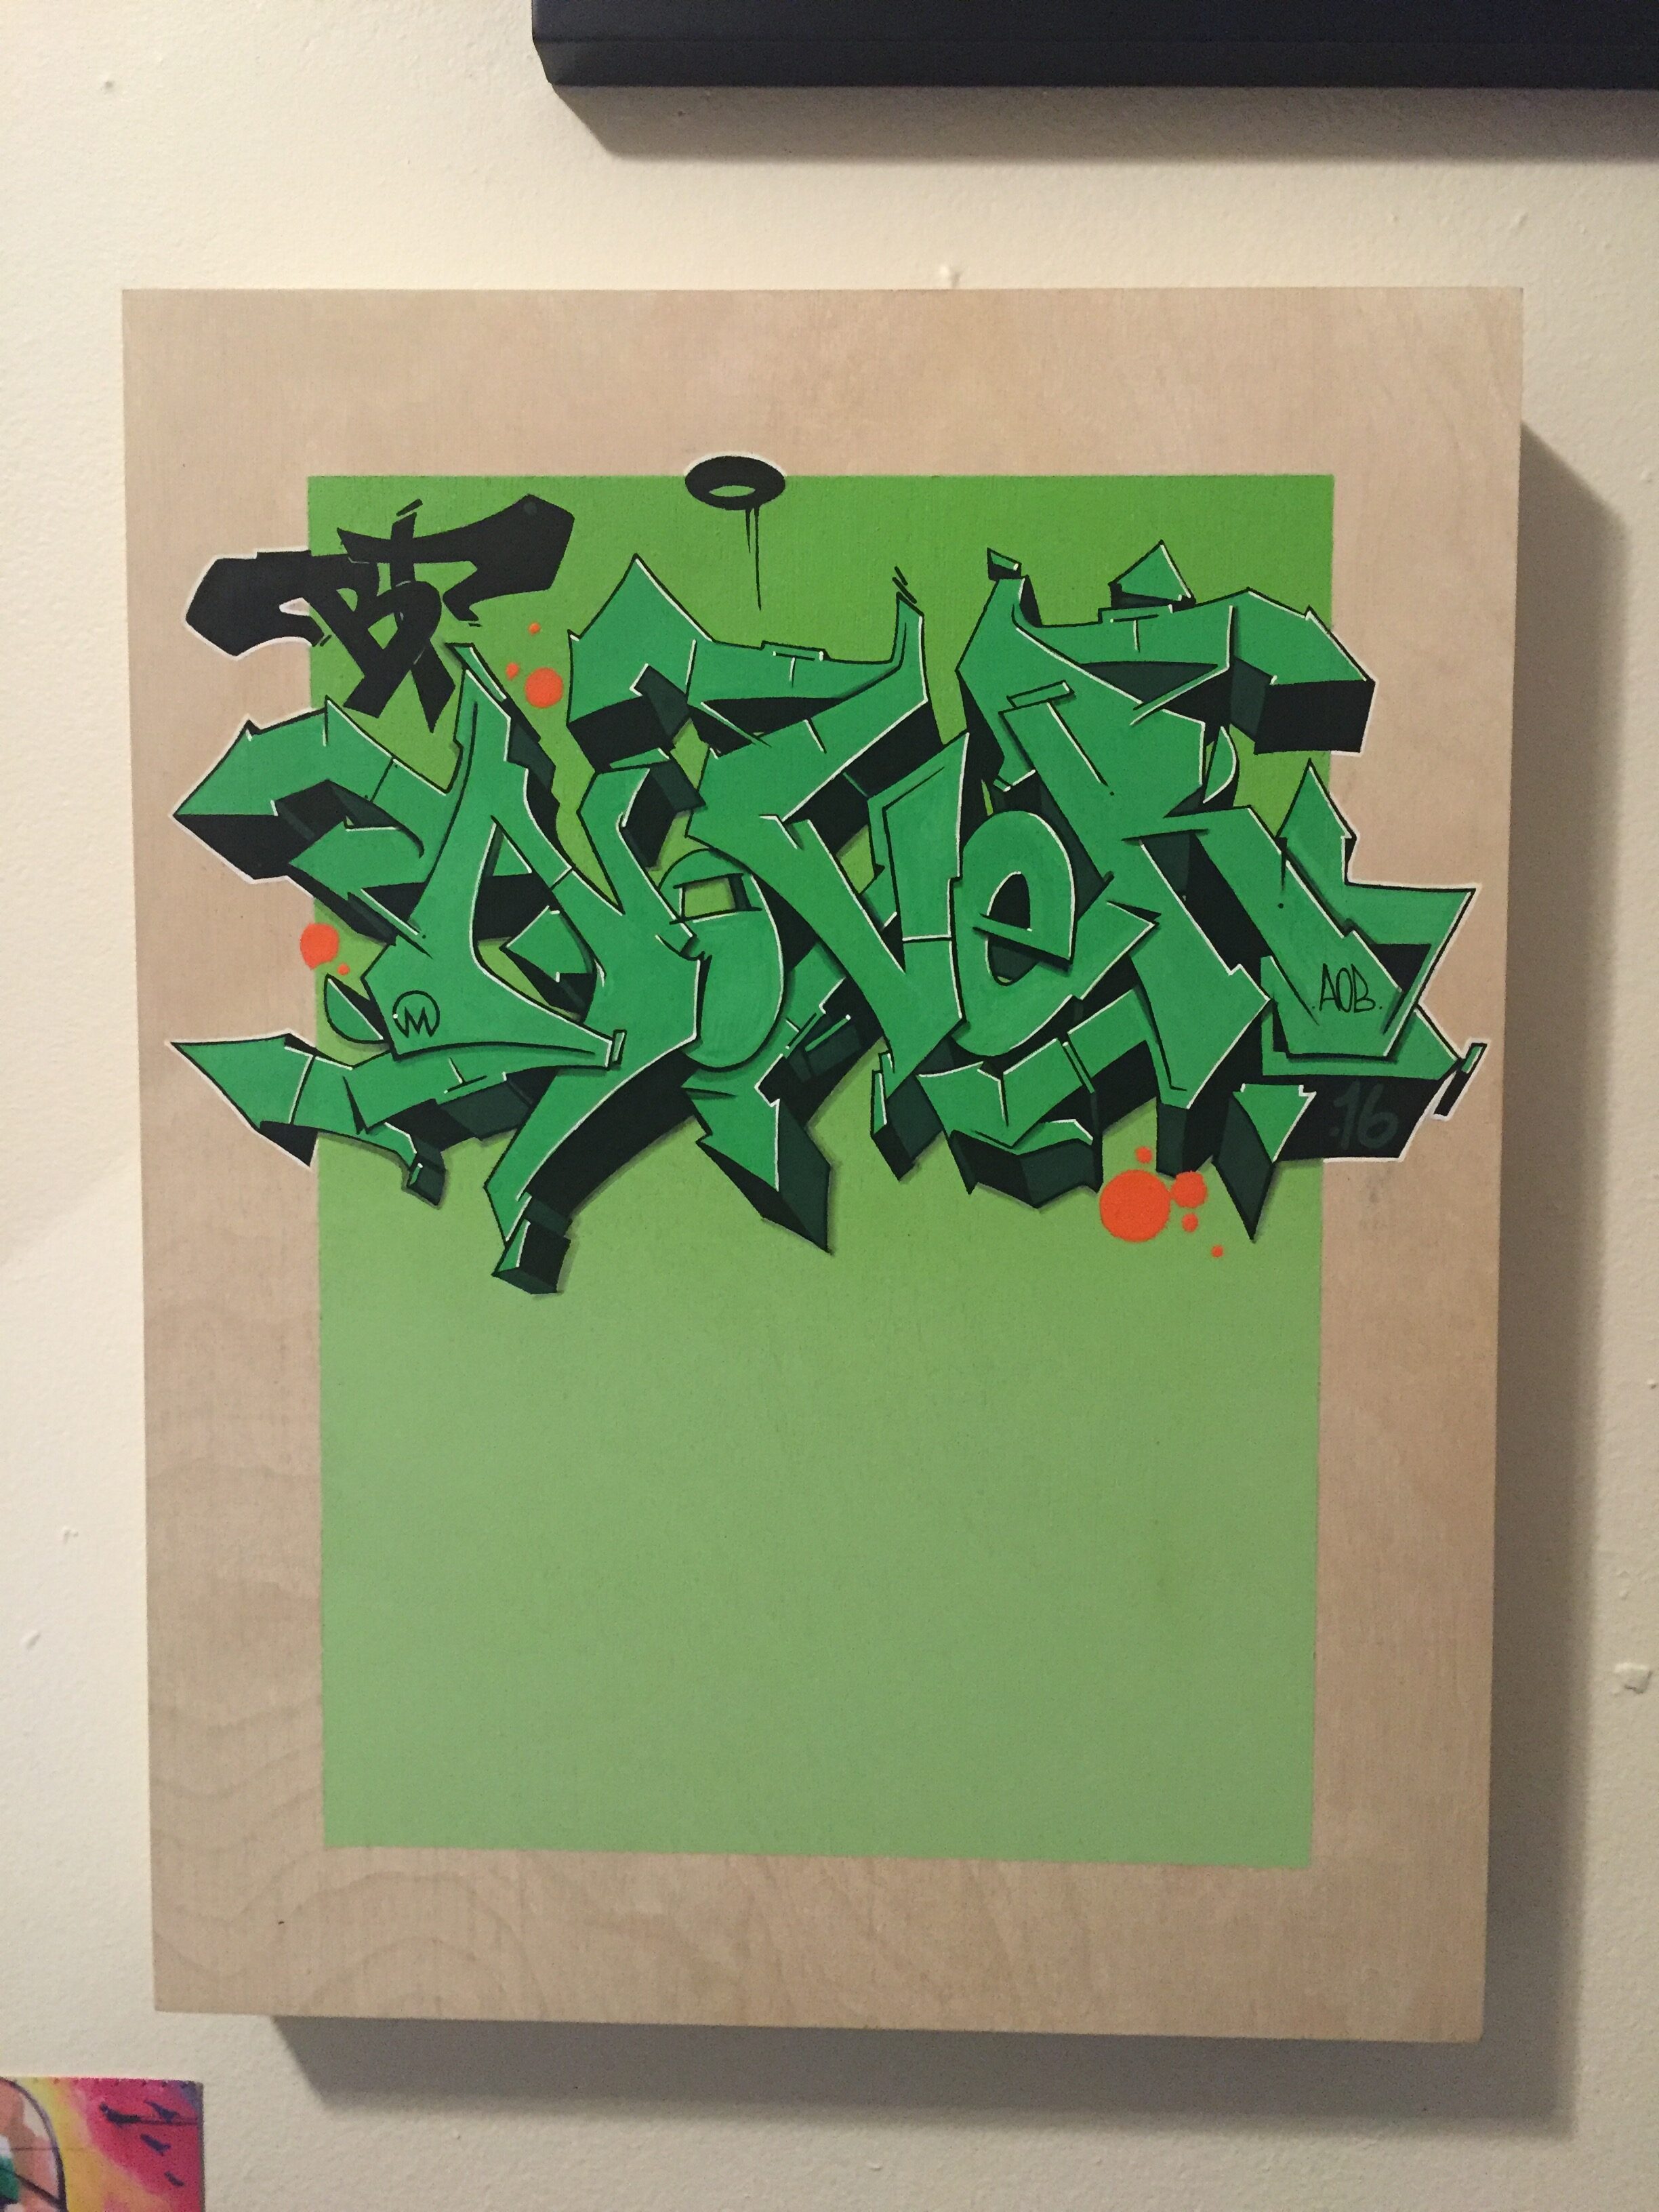 Nover, Graffiti on Wood Canvas with Markers and Spray Paint. 2016.